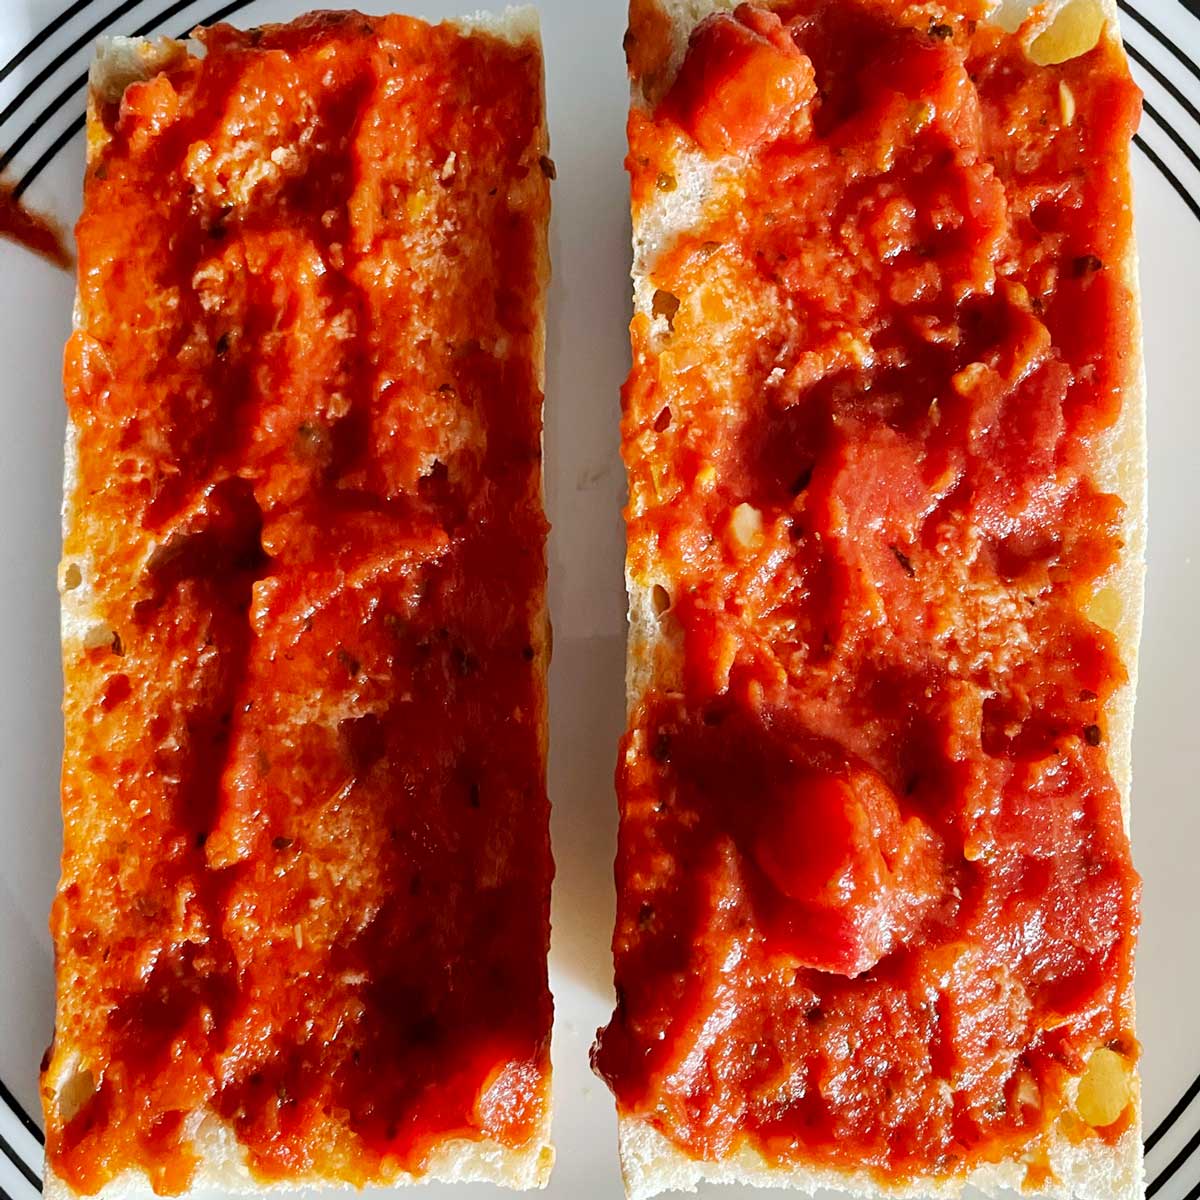 French bread with pizza sauce.